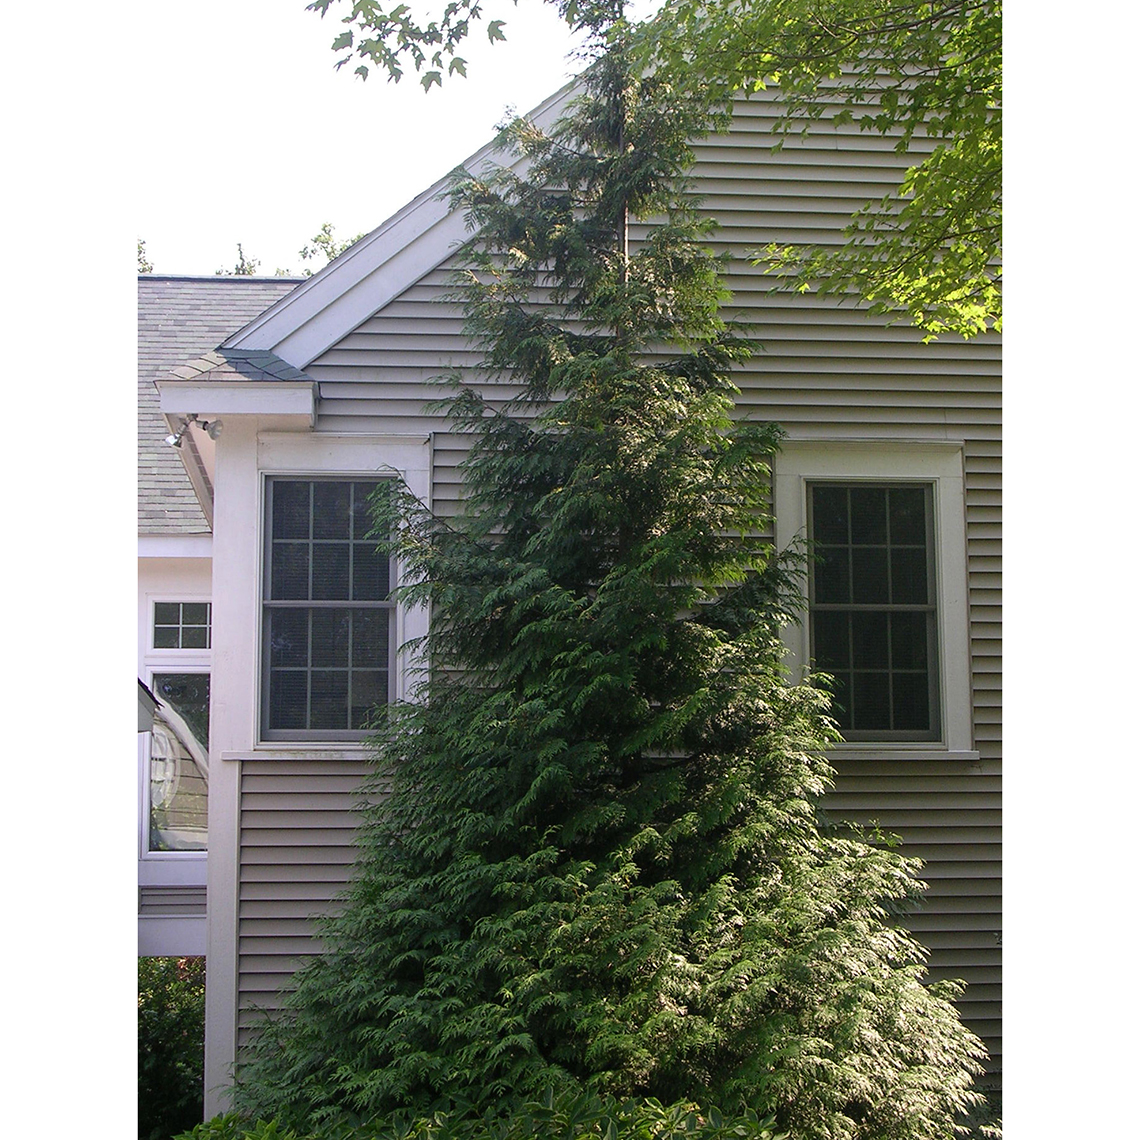 A large specimen of pyramidal evergreen Green Giant arbovitae planted between two windows of a tan colored house